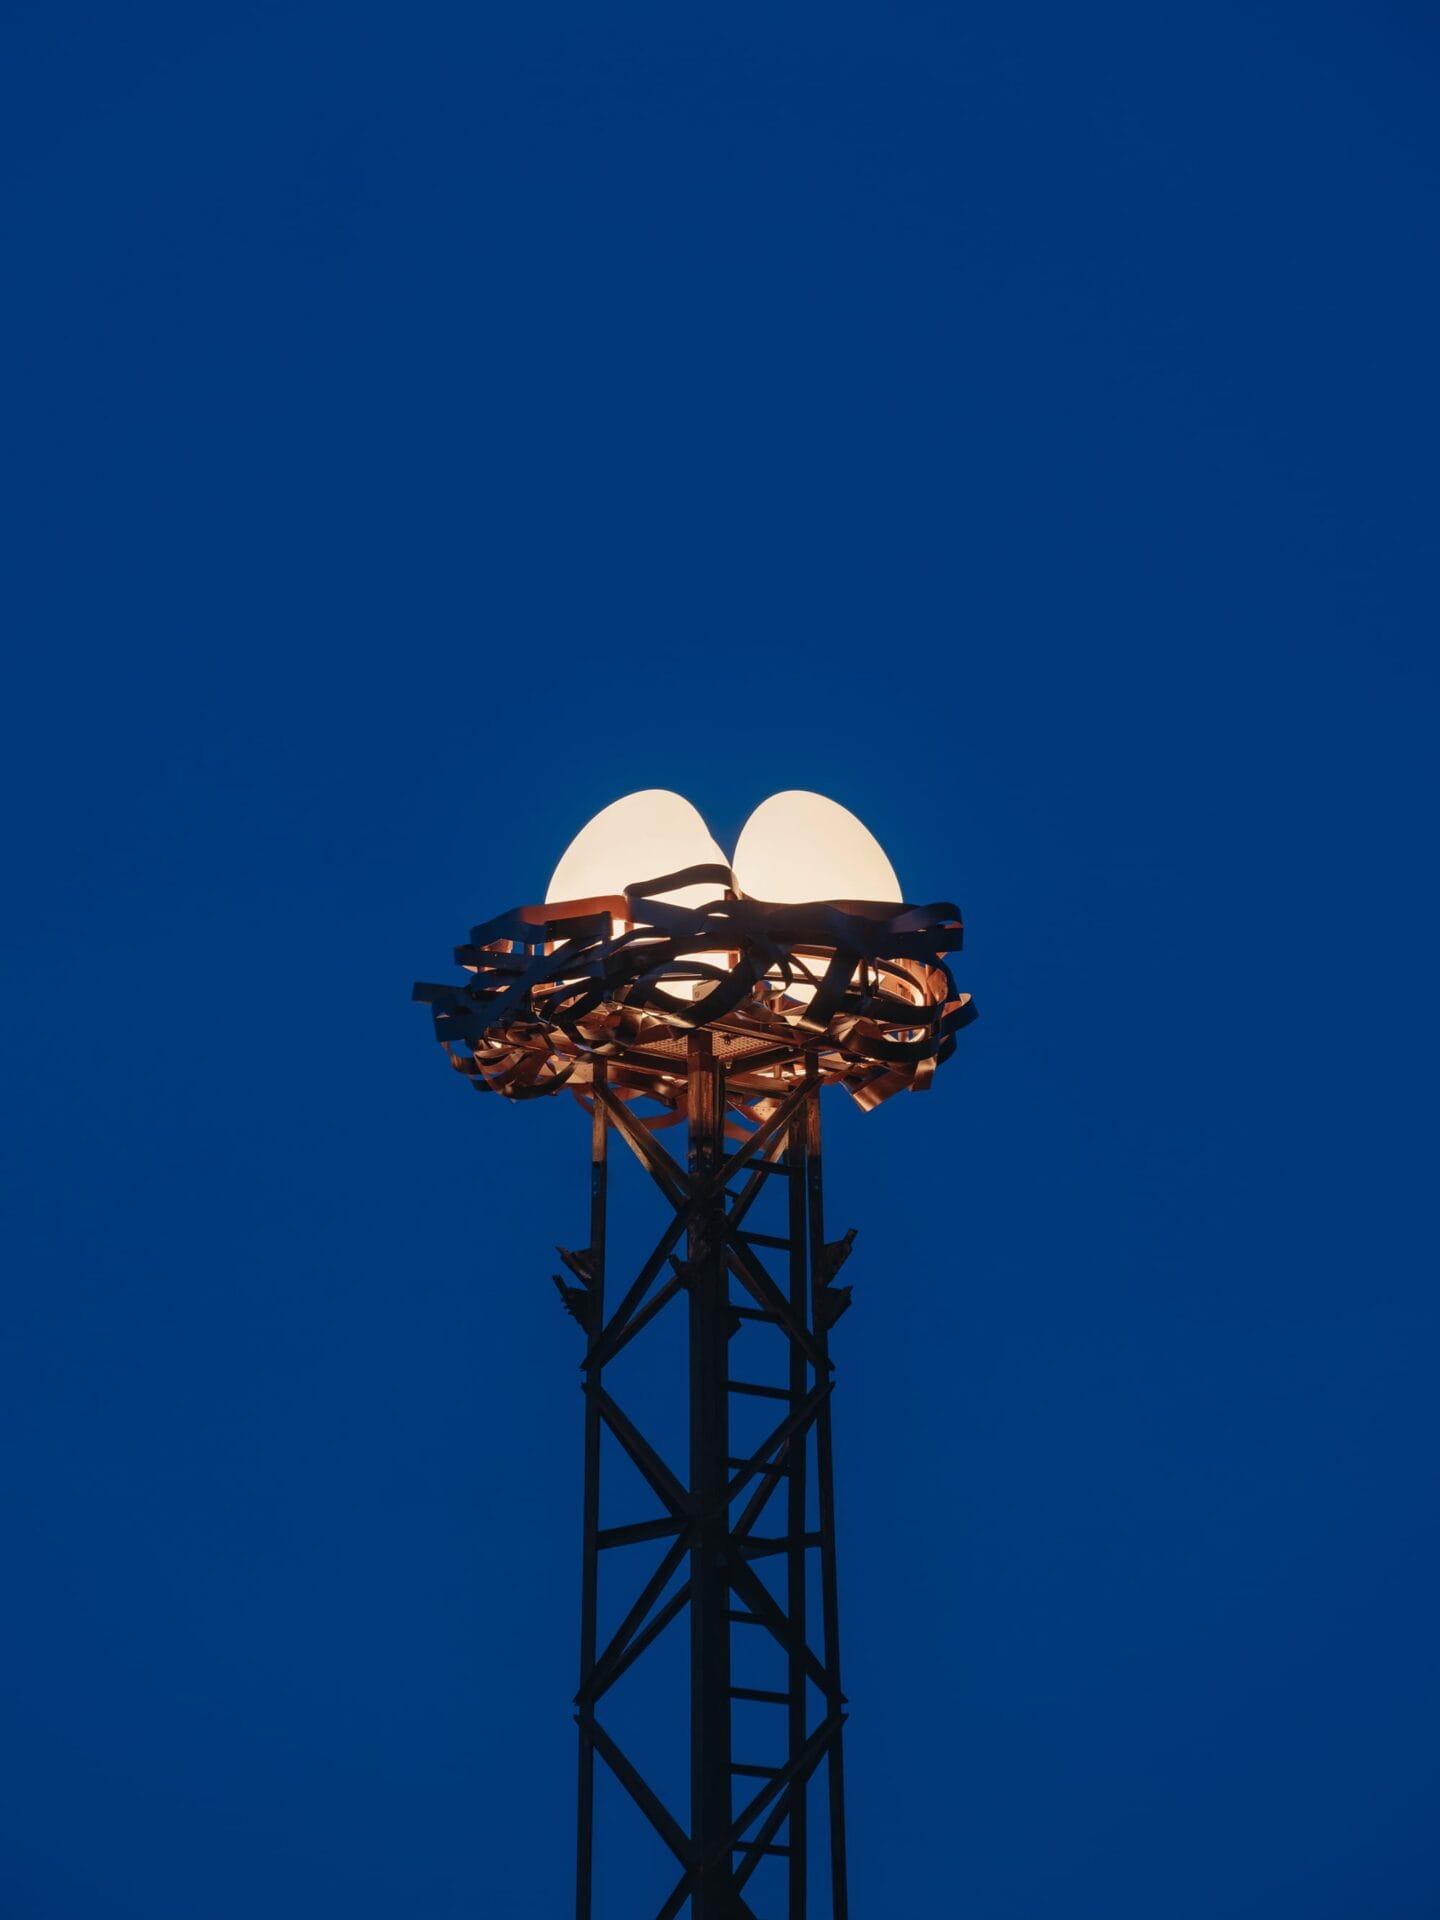 three illuminated eggs perch in a nest atop a tower against a bright blue background